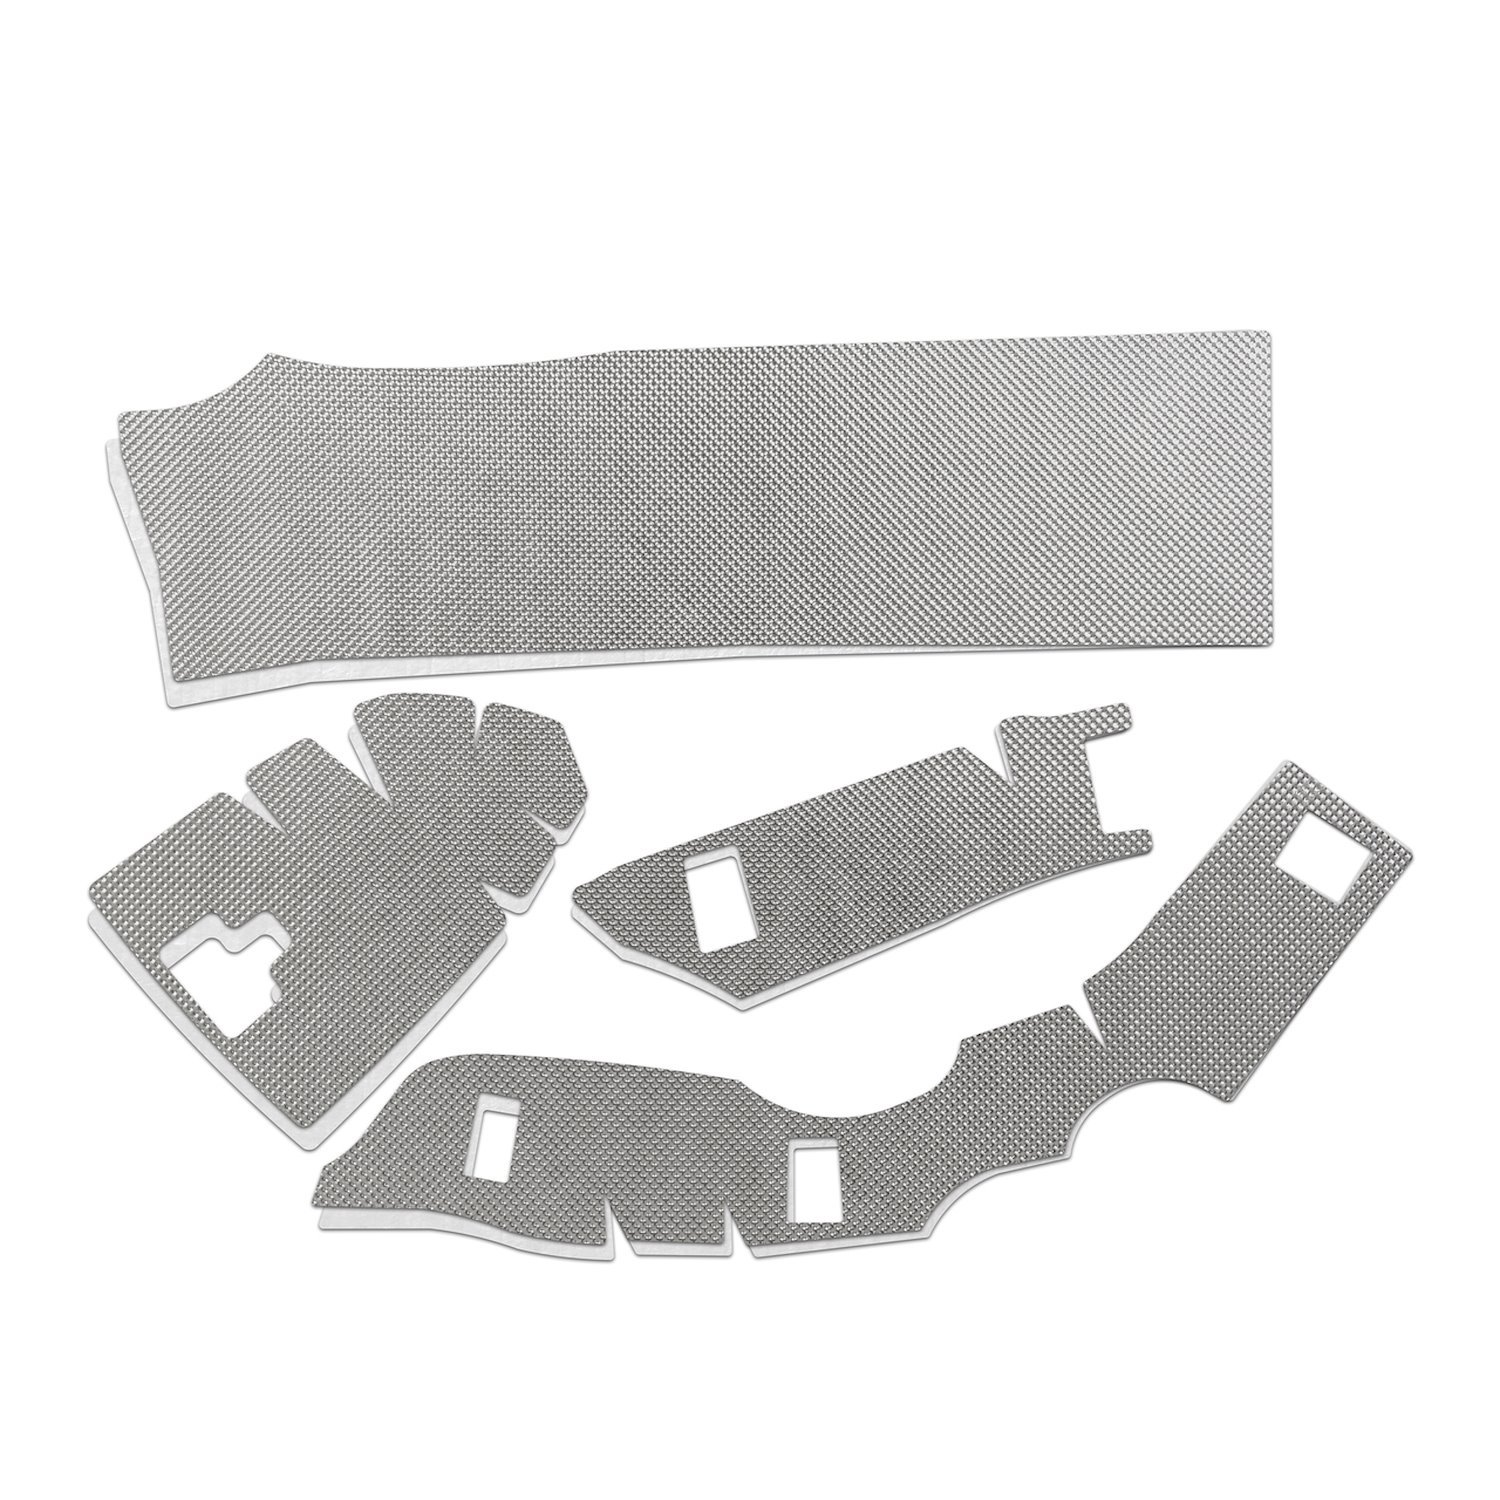 Heat Shield Liner Fits Select Indian Chieftain, Roadmaster,